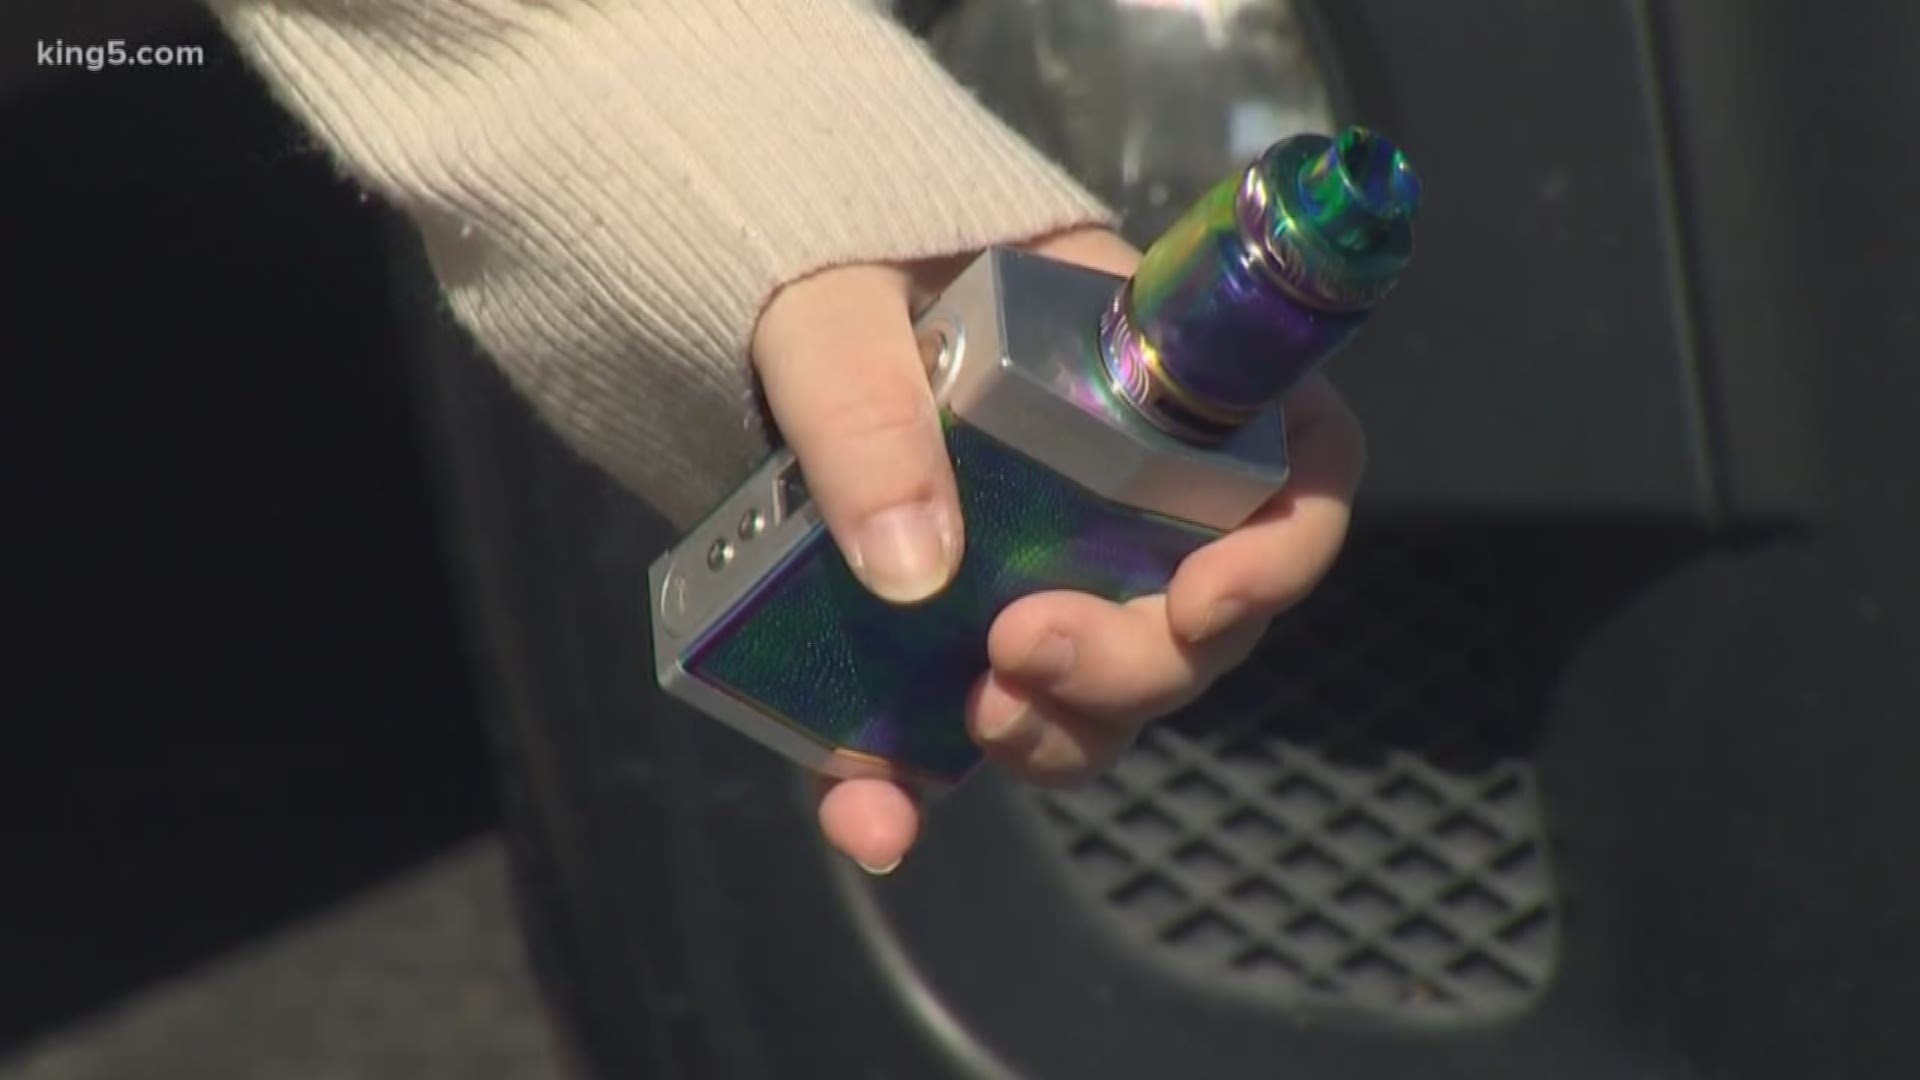 The Washington State Board of Health approved an emergency ban on the sale of flavored vaping products to begin on October 10. KING 5's Drew Mikkelsen reports.